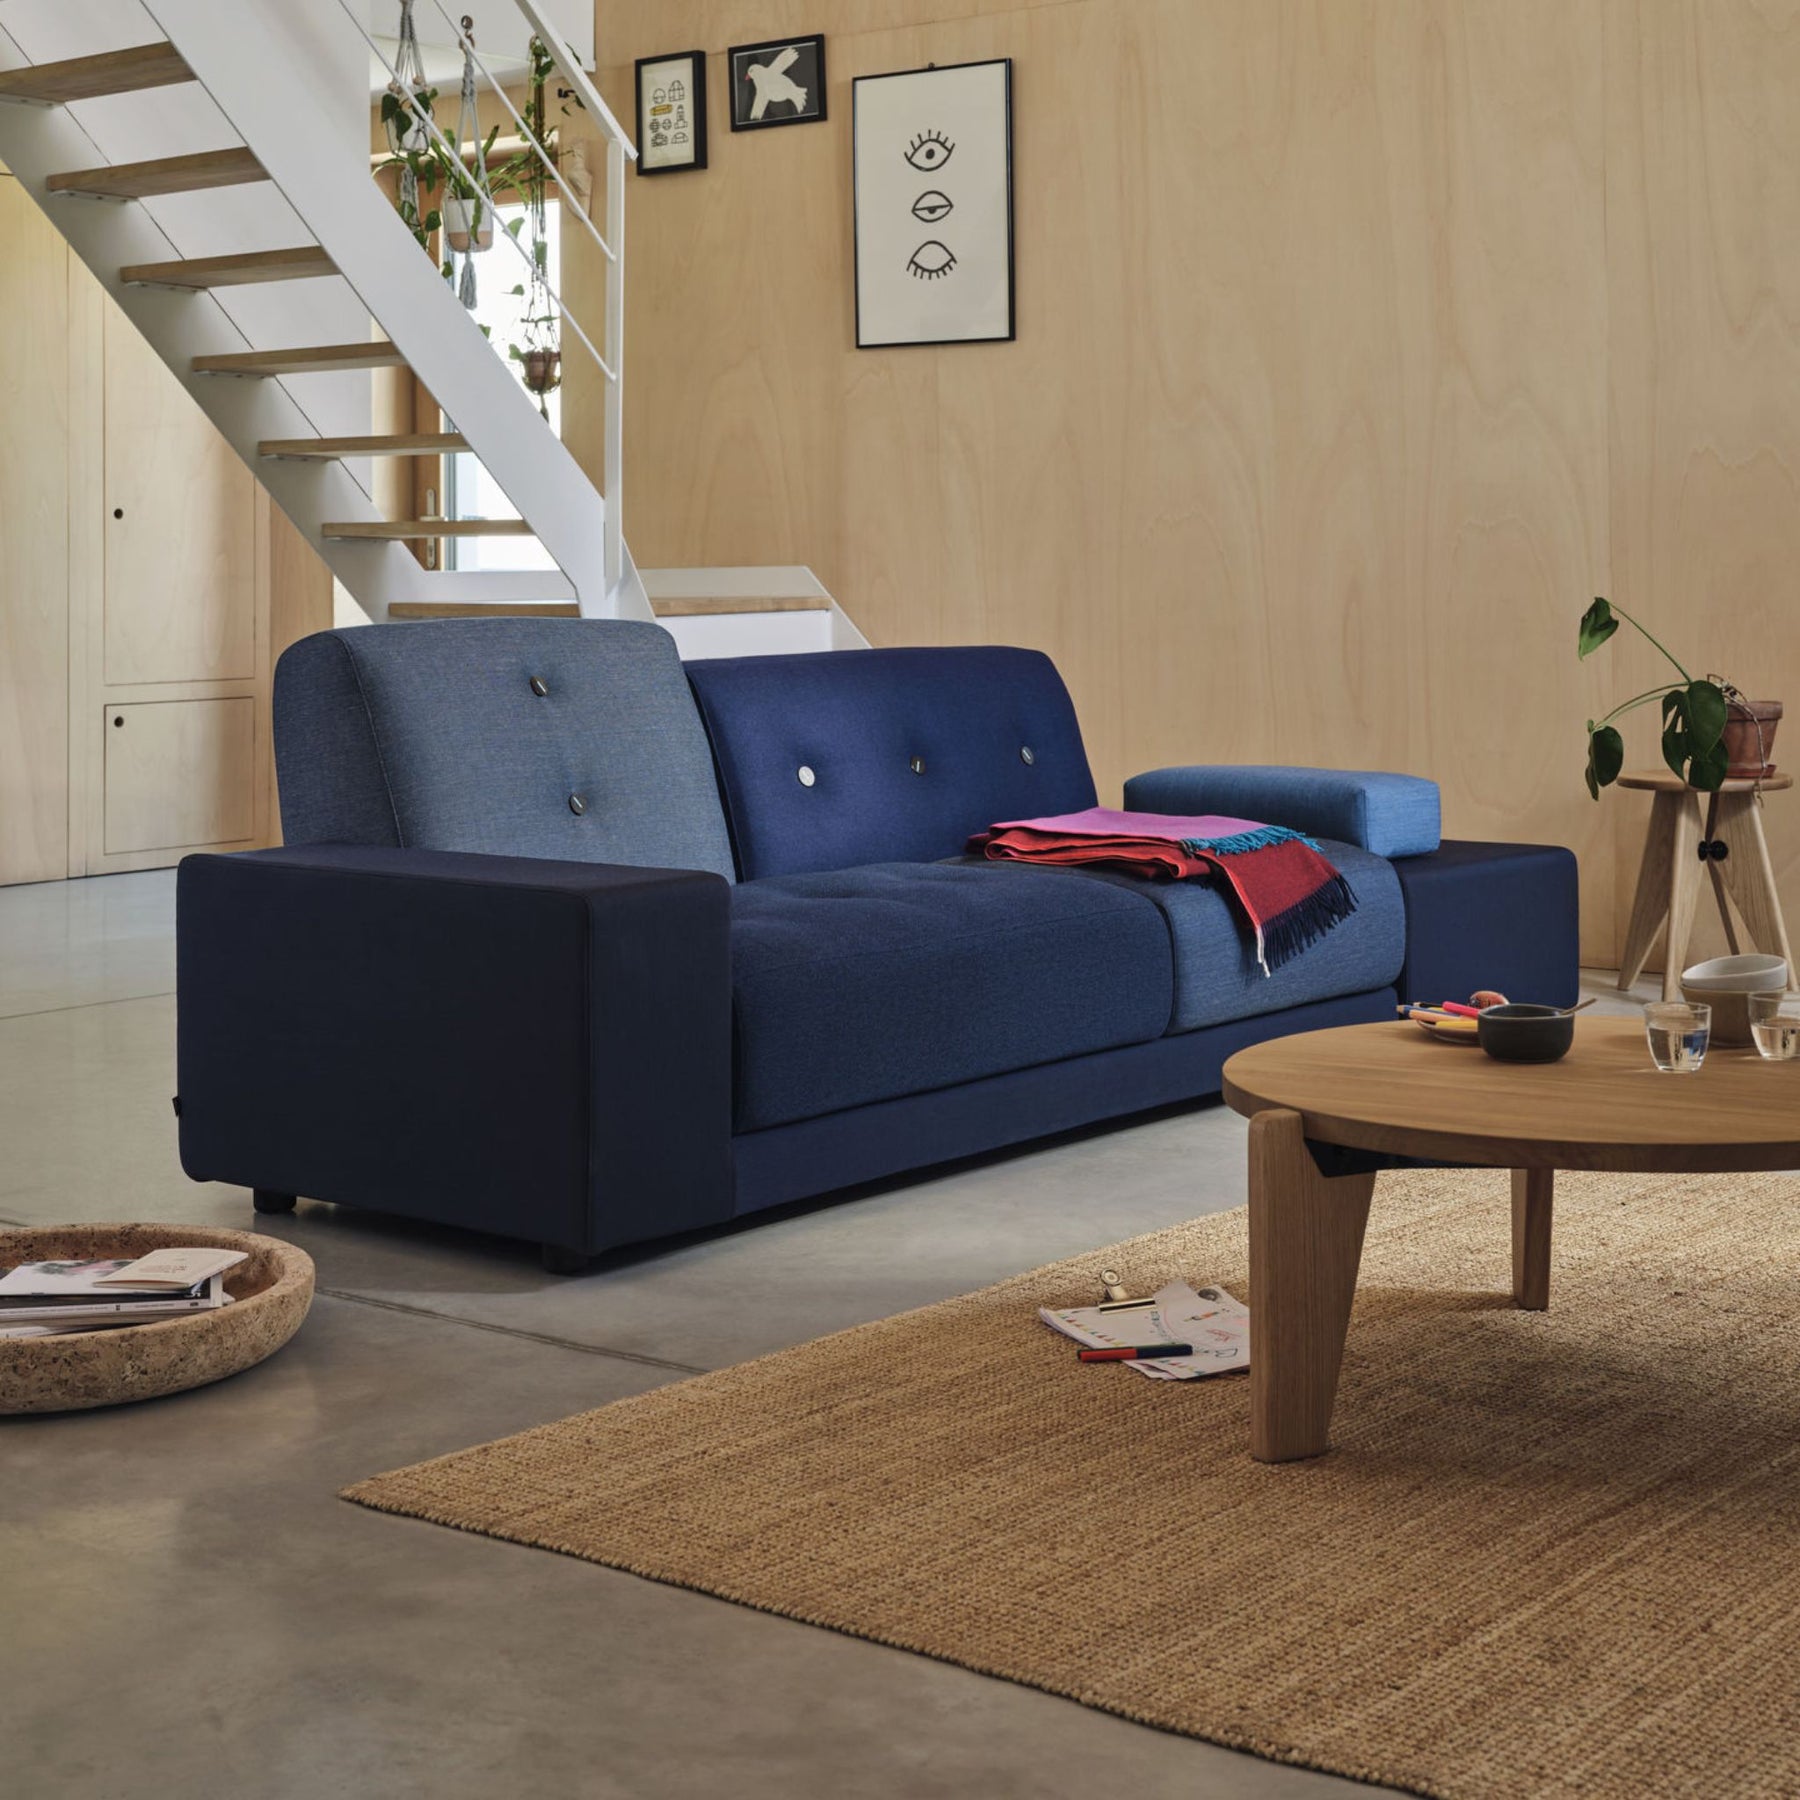 Vitra Polder Sofa Antarctic Blues in Living Room with Gueridon Bas Coffee Table